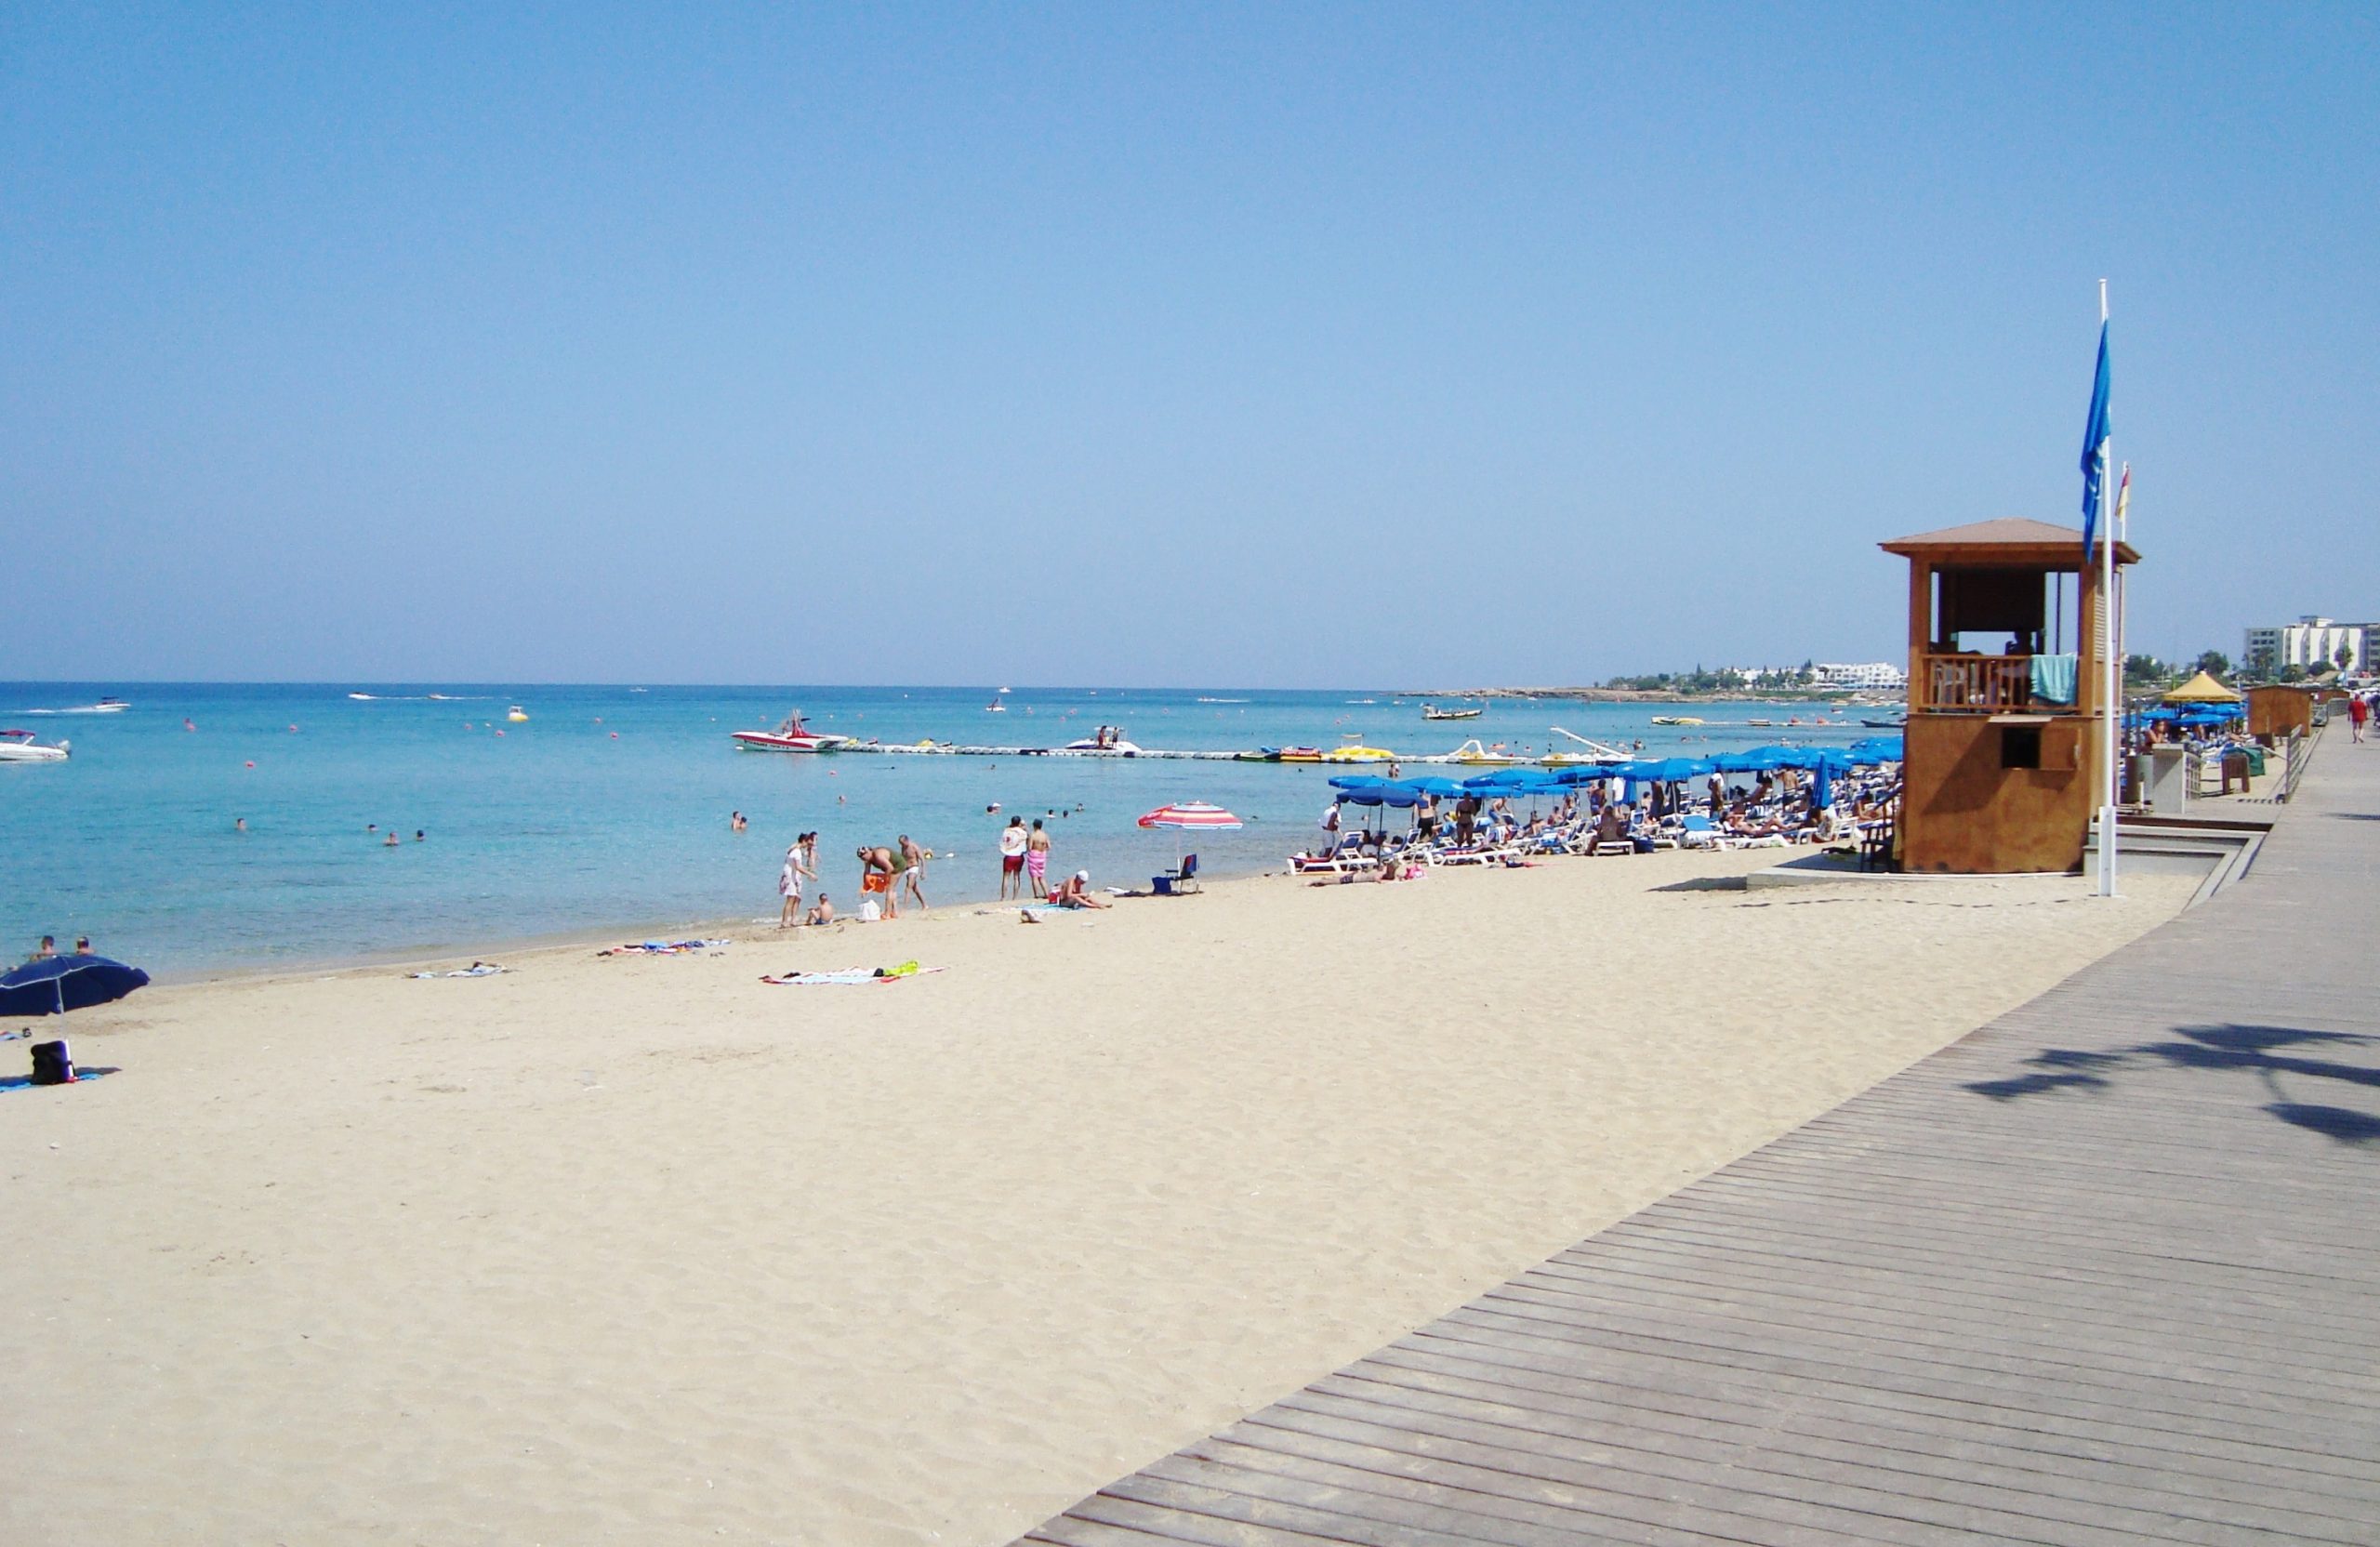 protaras beach at paralimni in the republic of cyprus 0 scaled Πρωταράς